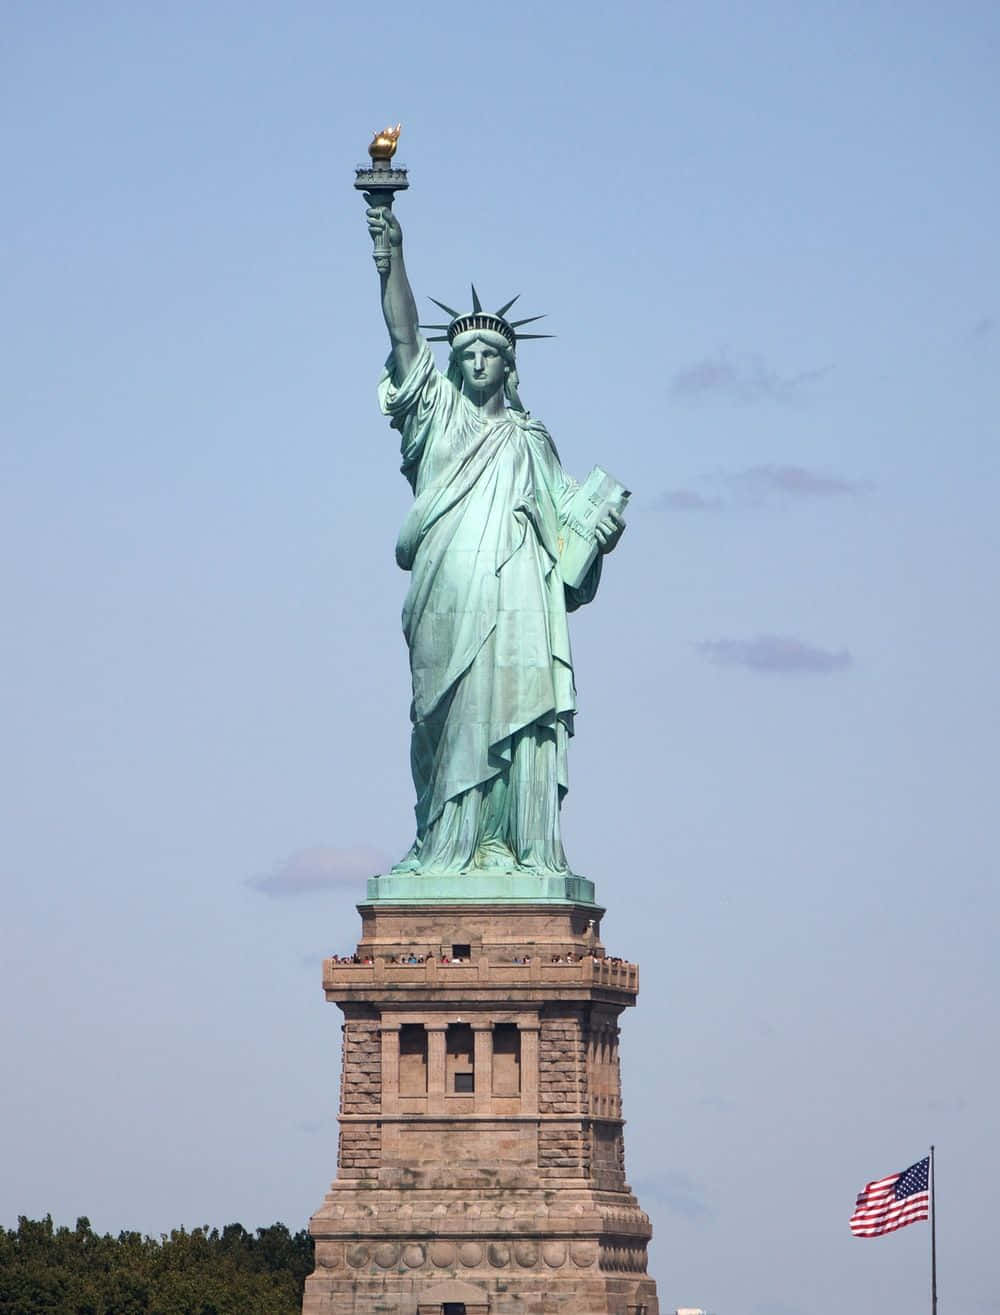 The iconic Statue of Liberty stands tall in New York harbor.